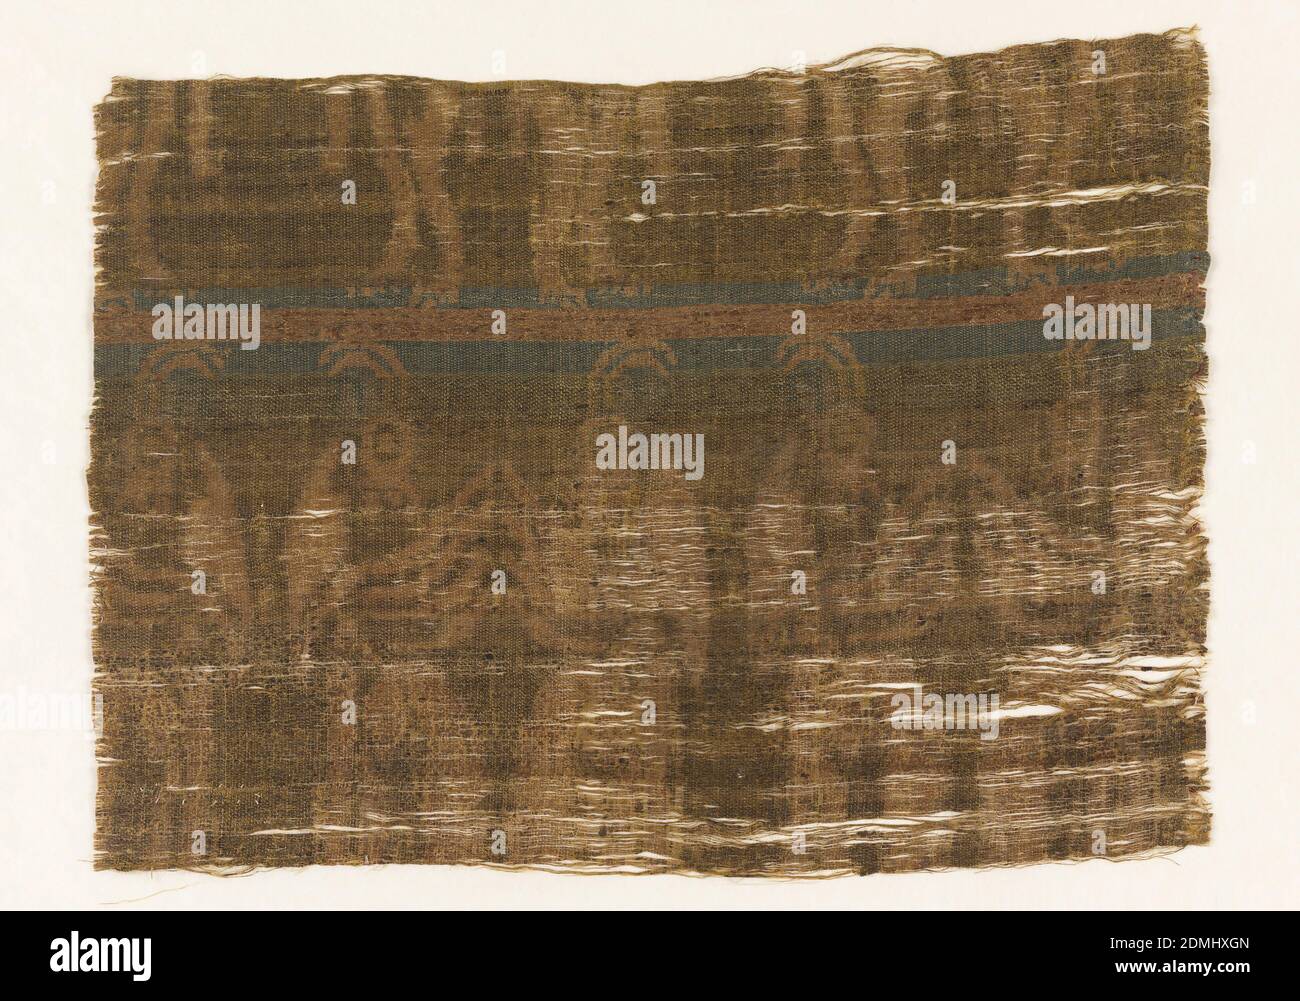 Fragment, Medium: silk Technique: compound weft twill (samite), Dark brown ground with addorsed winged goats in lighter brown/yellow. Red and two blue stripes approximately 2.5' from top., Sicily, 13th–14th century, woven textiles, Fragment Stock Photo